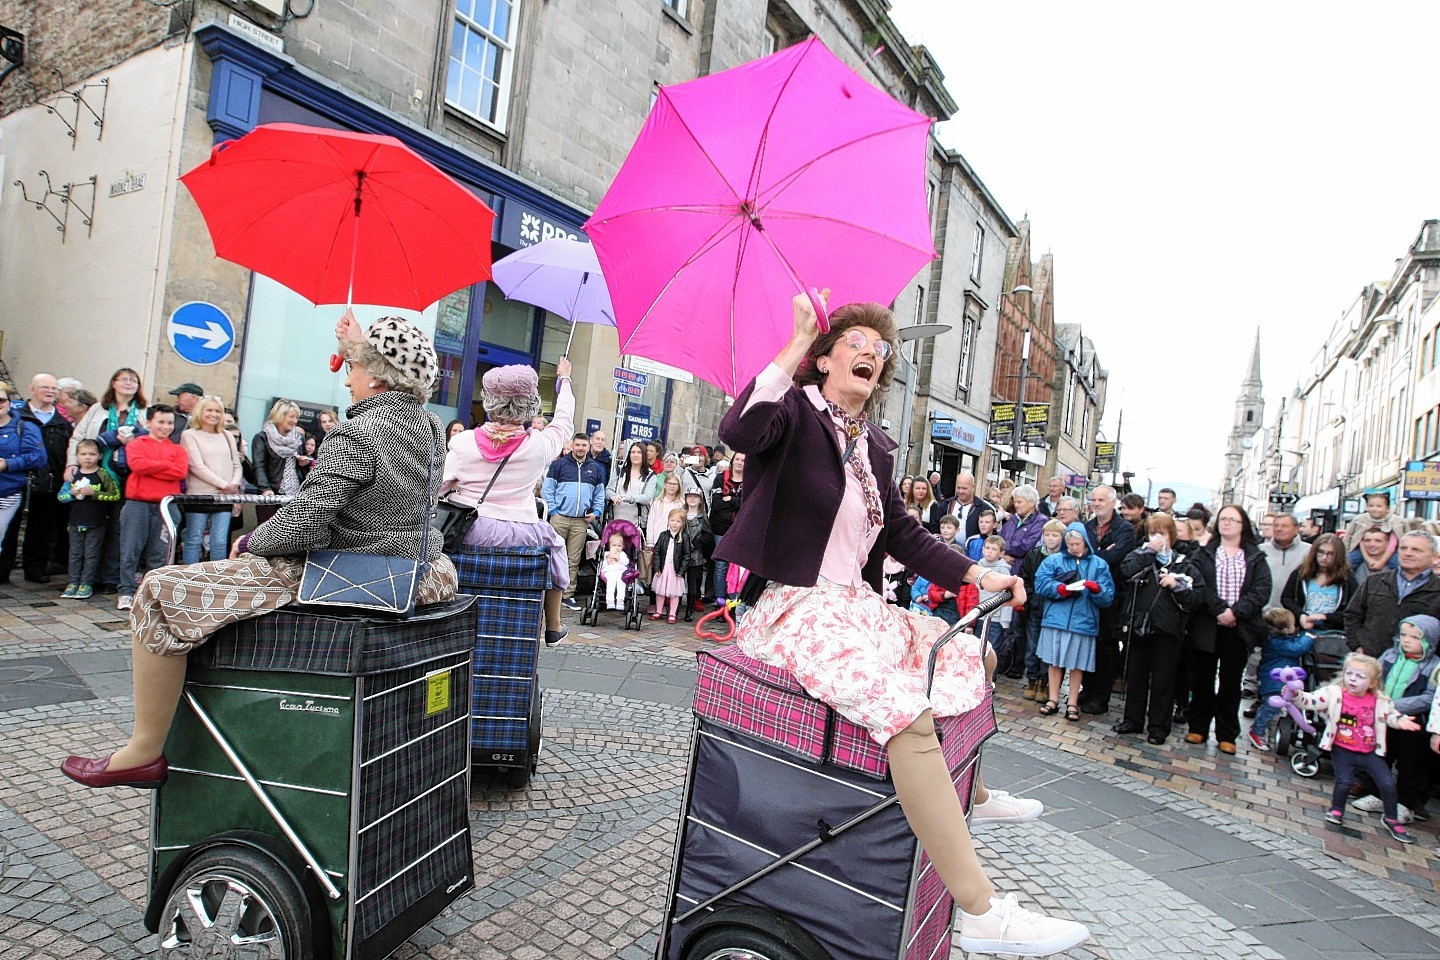 First day of Inverness street festival